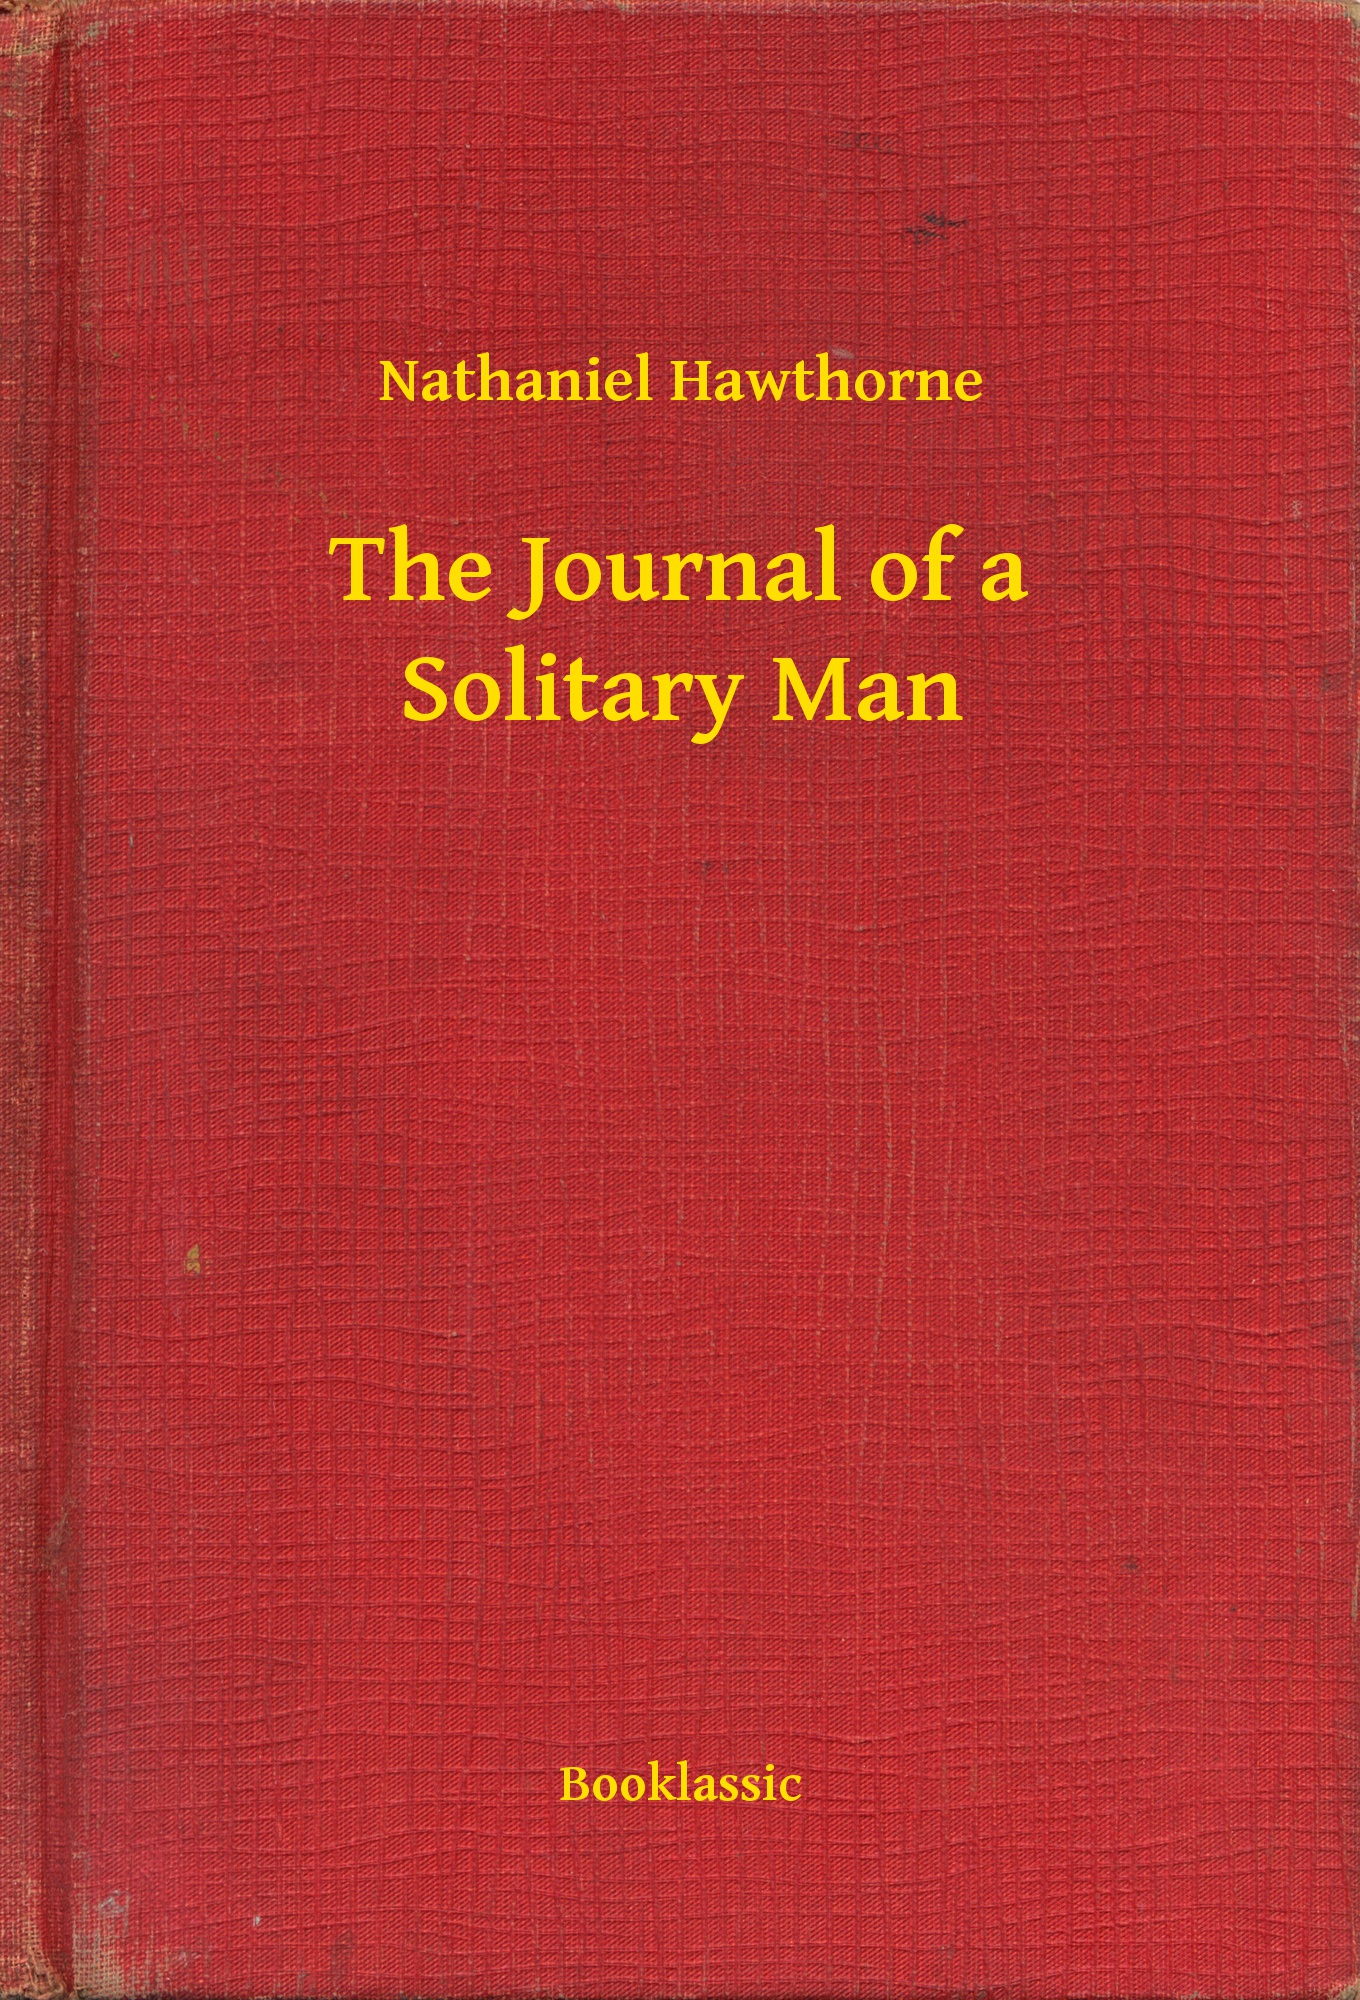 The Journal of a Solitary Man